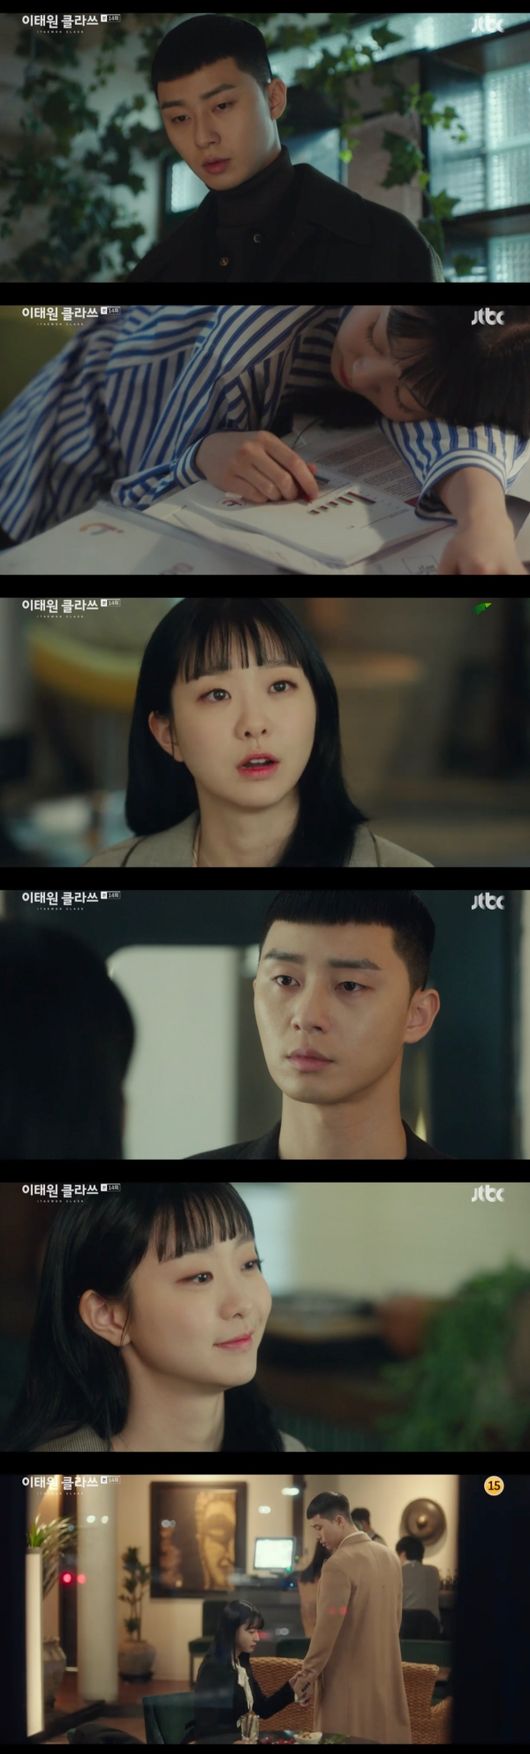 Itaewon Clath Park Seo-joon was hit by a car on behalf of Kim Dong-hee while he was aware of his mind toward Kim Da-mi.In the JTBC gilt drama Itaewon Klath (playplayplay by Gwangjin, directed by Kim Sung-yoon), which was broadcast on the 14th, Park Sae-ro-yi (Park Seo-joon) realized his love for Joy Seo (Kim Da-mi) was broadcast.Park Sae-ro-yi found Joysers office; Joyser was exhausted and asleep while working.Park Sae-ro-yi covered his outerwear to Joyser, and at that moment Joyser broke.Park Sae-ro-yi told Joy that Jang Dae-hee (Yoo Jae-myeong) had pancreatic cancer.Park Sae-ro-yi, Joy, Kang Min-jung (Kim Hye-eun) and Lee Ho-jin (Lee Da-wit) gathered in one place.Before Jang Dae-hee handed over his position to Jang Geun-soo (Kim Dong-hee), he decided to dismiss him from the presidency.Park Sae-ro-yi was worried about the already busy Joycer over the Chinese contract, which then said: Just listen to one wish, just give me a date.Park Sae-ro-yi responded by pretending to be moderate.Park Sae-ro-yi was working with Joy, when he received a call from Oh Soo-ah (Kwon Na-ra).Someones out of love and is out all night, and some are flirting with a woman, said Joy, with Park Sae-ro-yi in a straight line, dont do that anymore, like I like it.I told him that you obviously do not see him as a woman. Park Sae-ro-yi hurriedly left and said, Why should I feel sorry? Why do I make this feeling?Joy, who was sullen, laughed immediately and said, I do not know why. I feel a little like a woman. I know the delegate best.I am now seen as a woman. Park Sae-ro-yi left the office in a panic.Park Sae-ro-yi and Oh Soo-ah met at a cafe in Itaewon; Oh Soo-ah asked Park Sae-ro-yi, Do I still like it?But Park Sae-ro-yi didnt answer, and Joyser came into the café where they were with Jang Geun-soo, whom he had come across.Joyser saw Park Sae-ro-yi with Oh Soo-ah and left the cafe; Park Sae-ro-yi was displeased to see such a Joy book.Oh Soo-ah had a gut feeling for Park Sae-ro-yis changed mind; Oh Soo-ah caught Park Sae-ro-yi trying to go.And asked, Do you like Seo-yool Lee? Oh Soo-ah said, Its 15 years, you have to make me white water, you have to like me.But Park Sae-ro-yi never said he liked it.Oh Soo-ah came across Jean, who was released early as a model, as well as Ahn, who had been drinking together.Jean asked Oh Soo-ah, Do you still like Park Sae-ro-yi? Oh Soo-ahs reaction was cold.I guess Im also going to have to be a terrible guy for you, Jean, the Fountainhead, said bitterly.On the day of the shareholders meeting, Joy was overworked. Joy was walking and fell down.Kang Min-jung and Lee Ho-jin, who heard the news, worried that Park Sae-ro-yi would not come to the shareholders meeting.Kang Min-jung ran into Jang Dae-hee in the lobby, who told Jang Dae-hee, I heard it was a lot sick. So Jang Dae-hee said, It would be a good card, but I did not use it.My health, my outside job, and my family. There is no doubt about that. But I always make the wrong choice.I should use it and throw it away, not put it on top.The meeting was held at the meeting of shareholders, which was held outside the board of directors. The result was rejected.While it was a priority to soothe shareholders, Park Sae-ro-yi headed straight to the hospital.Joyser was told of the rejection and immediately tried to meet shareholders, Park Sae-ro-yi told Joyser: Take a break - if you move now, youre fired.Park Sae-ro-yi left the hospital with Choi Seung-kwon (Ryu Kyung-soo).Choi Seung-kwon noticed Park Sae-ro-yis mind and advised him to do what he wants, and Park Sae-ro-yi was aware of his feelings for Joy again.Park Sae-ro-yi bought a necklace that Joy had said he wanted to have and went back to the hospital, when he overheard Joyser talking to Ma Hyun-yi (Lee Joo-young).Joy said, I confess that I love you. I told you to cut off if your favorite mind is a reason for dismissal.The reason I can express my affection to the representative is because I am a good worker and a necessary person.I have to be the person I need from the representative, who has to be around no matter what he says. Park Sae-ro-yi realized the vacancy in Joy; the most grateful, the most sorry, were all Joysers to Park Sae-ro-yi.The most frightening moment for him was when Joycer fell, and with the best luck of his life, he recalled when Joycer came to the moon.Park Sae-ro-yi thinks its all over you and finally realises he loves Joy.Park Sae-ro-yi headed straight to the hospital to see Joy, who also came to see Joys hospitalization; Park Sae-ro-yi told Jang Geun-soo, I understand.Shes the kind of woman whos willing to risk her life, she said.If you have a girls heart, you should fold it. But Ill do it. Traitor, trash. You can swear.I like Seo-yool Lee, he declared.Park Sae-ro-yi found Joysers ward; Joyser was kidnapped by a questionable man disguised as a nurse.Jang noticed this, too, and followed Park Sae-ro-yi. Everything was done by Jean Fountainhead.Excited, Jang tried to run at the Fountainhead, when the car rushed to Jang, who pushed him away and was hit by a car instead.Park Sae-ro-yi, while distracted, regretted pushing out Joy - and thought: I miss you crazy.Itaewon Klath captures broadcast screen